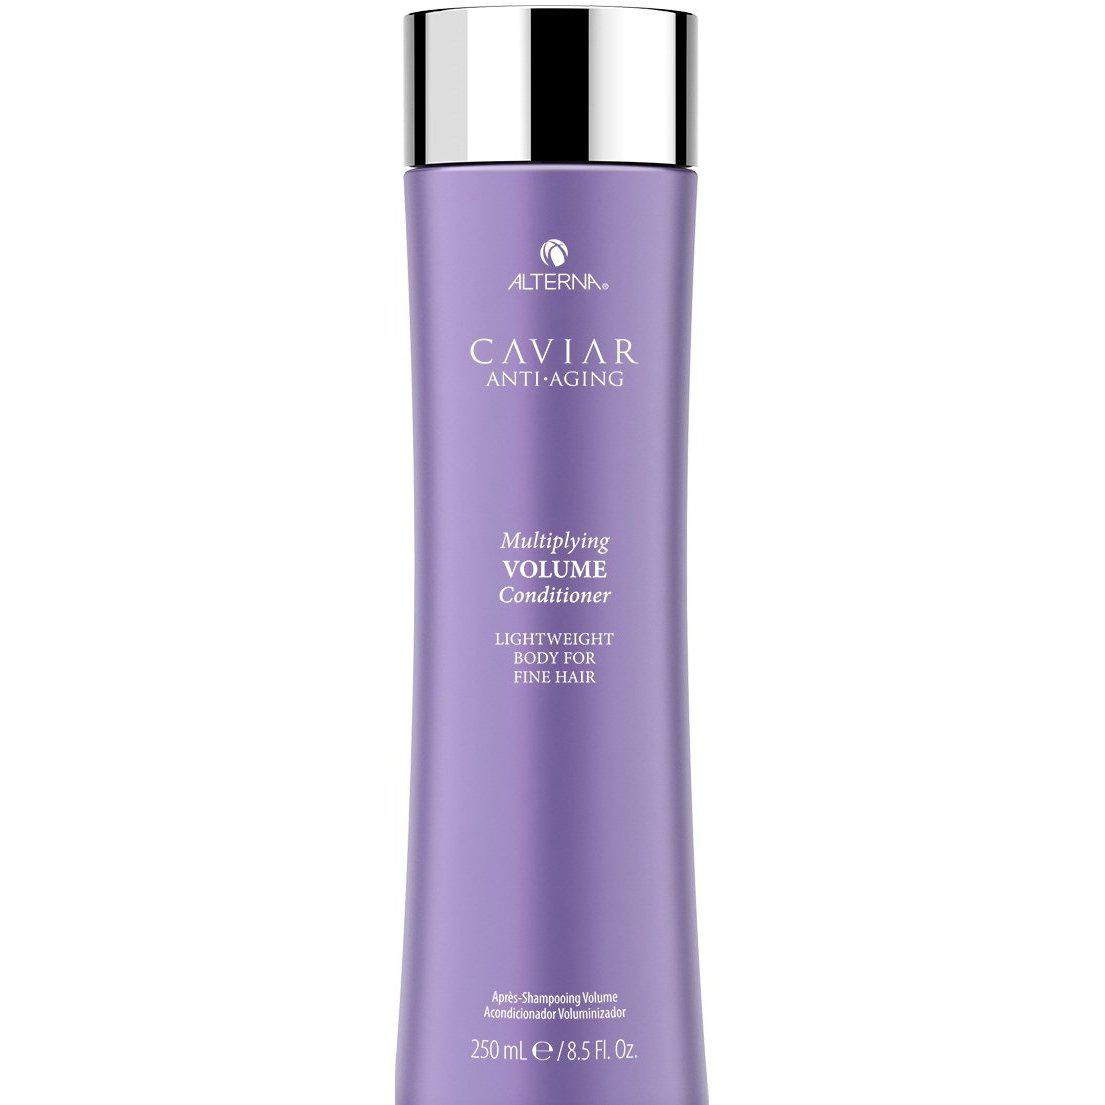 CAVIAR Anti-Aging Multiplying Volume Conditioner-Conditioner-Luxury Haircare Company